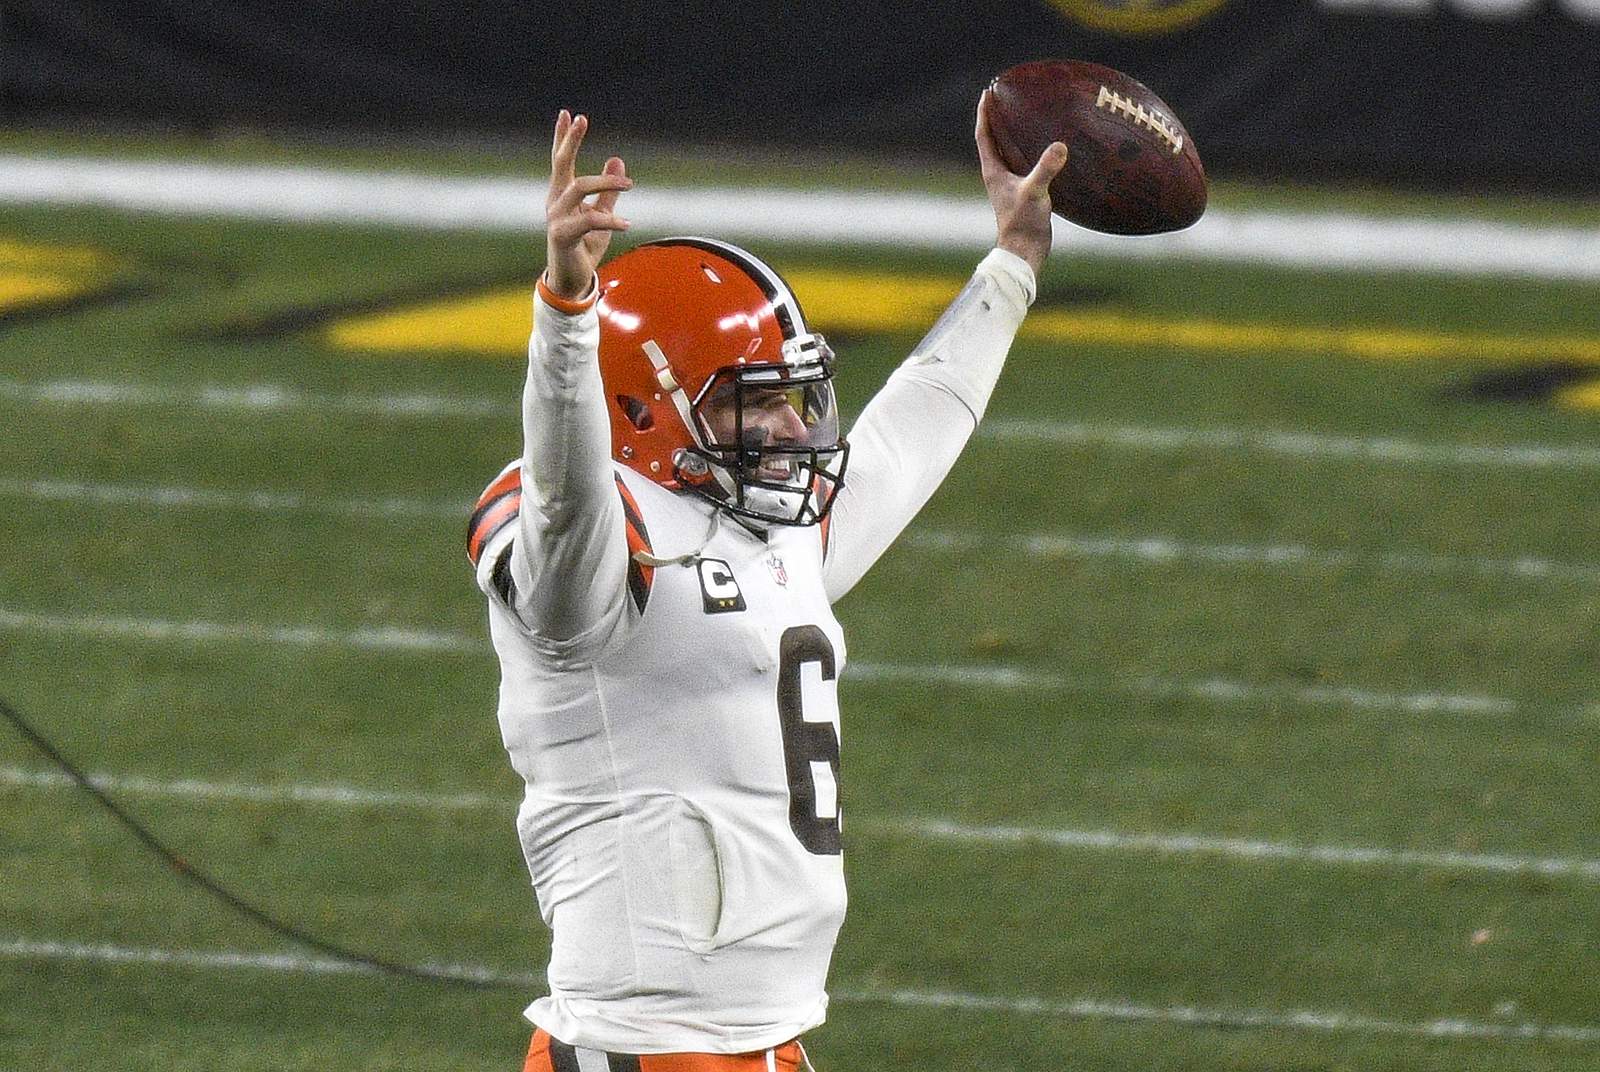 Same old Browns? Hardly. Cleveland drills Steelers 48-37